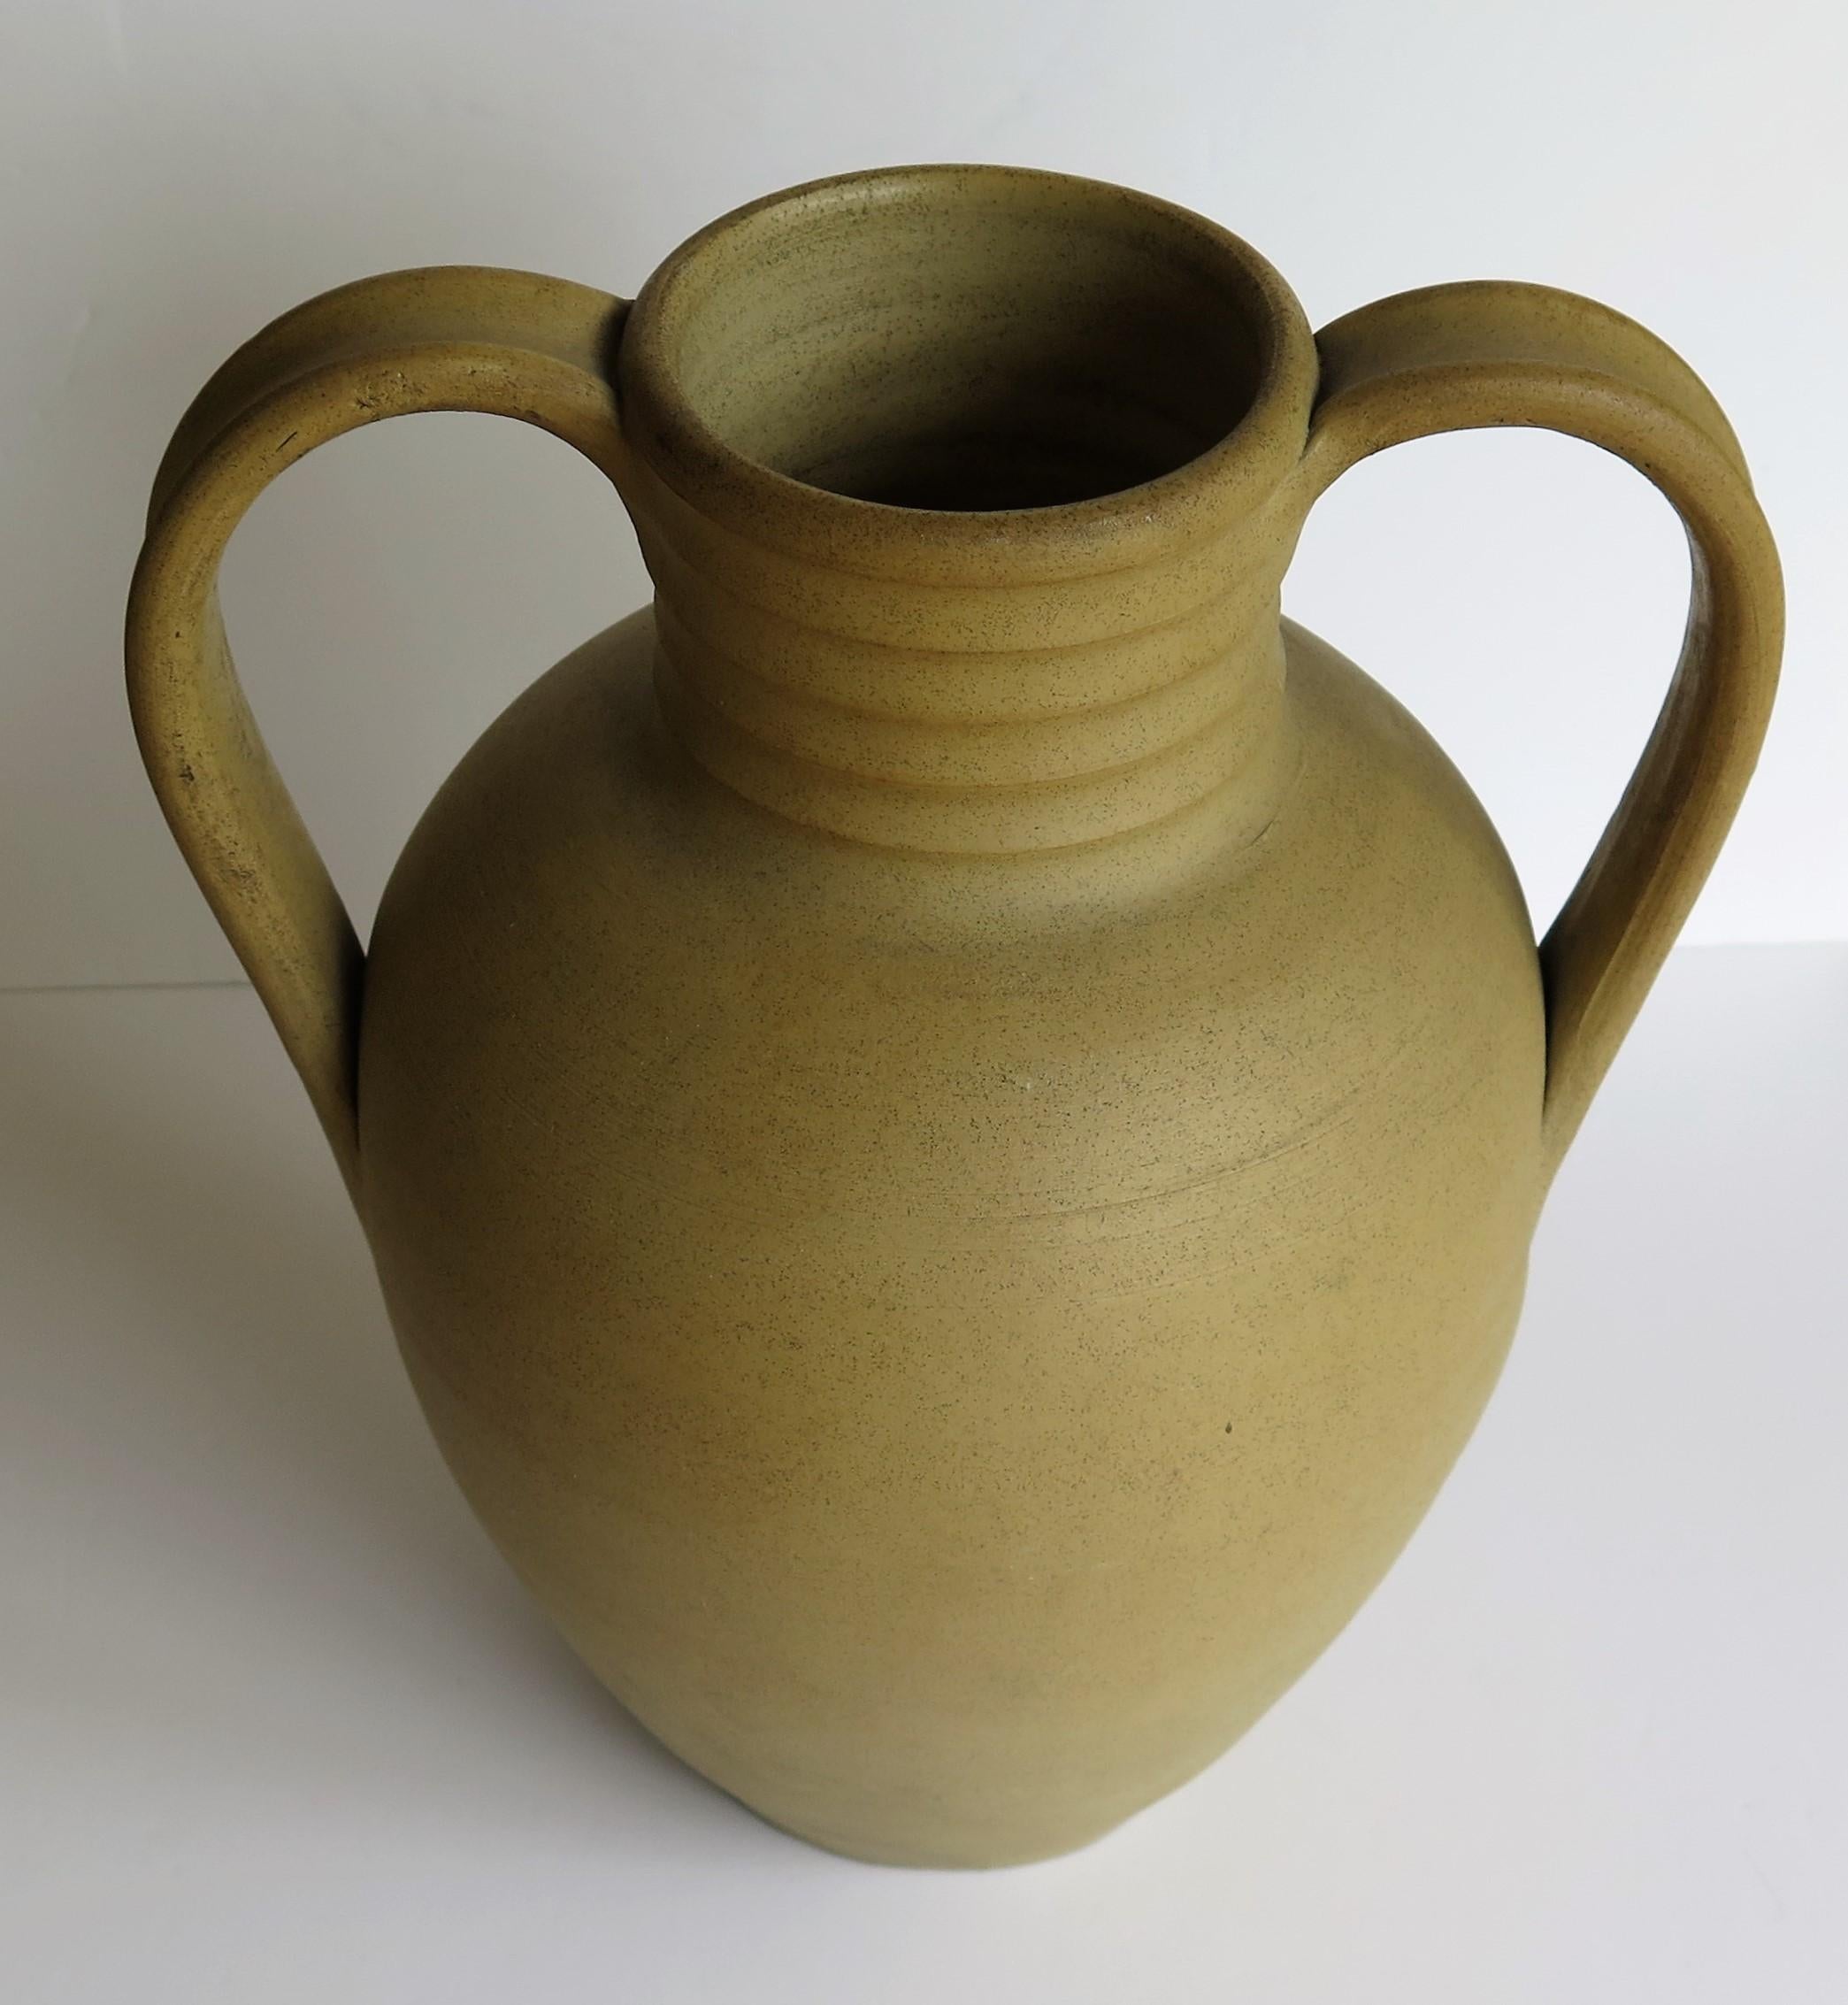 Large Stoneware Vase or Urn by Moira Pottery Hillstonia Hand Potted, circa 1935 For Sale 4